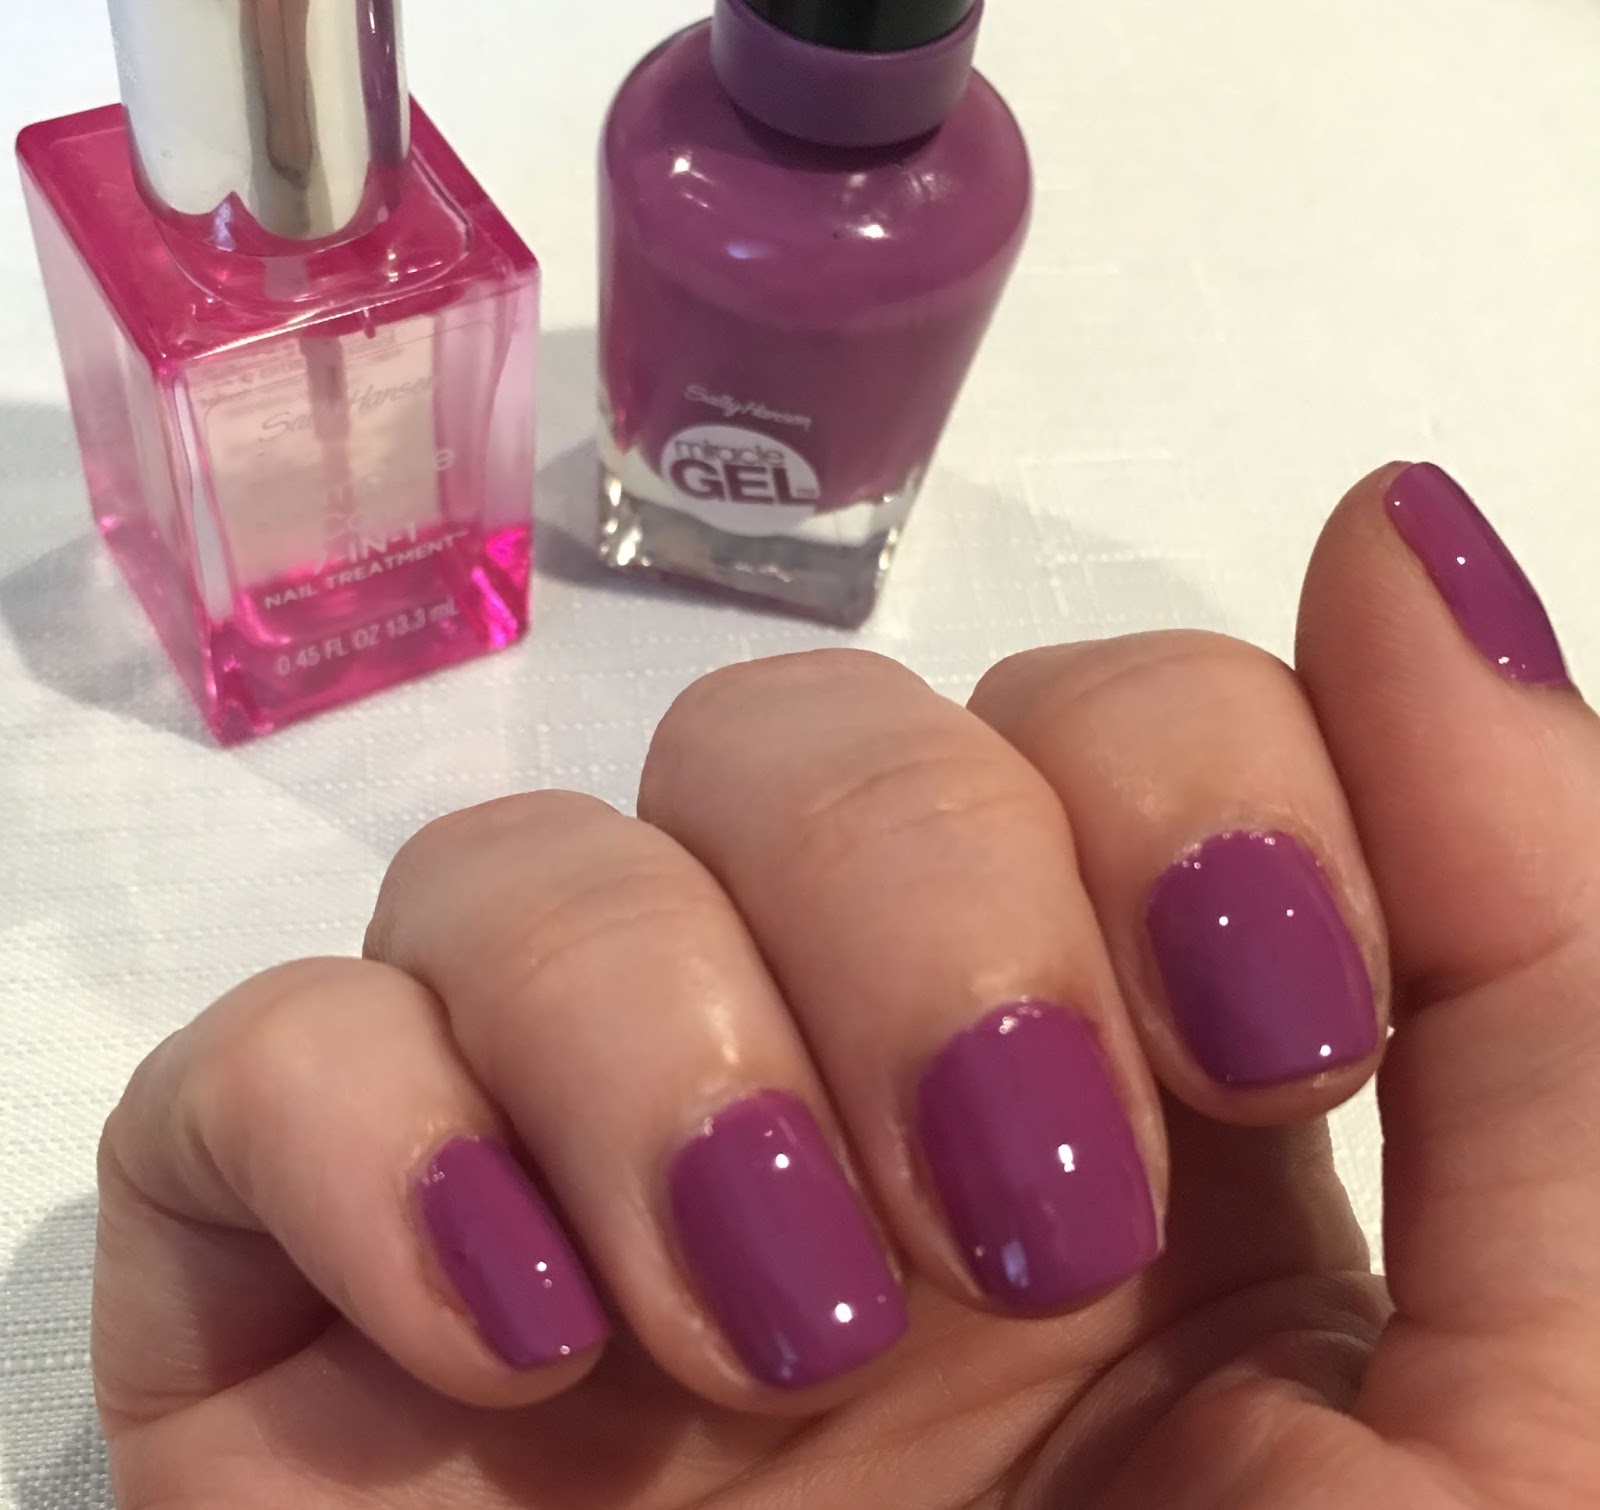 Makeup and Macaroons: A BIG Yes to the Sally Hansen Miracle Gel Polishes